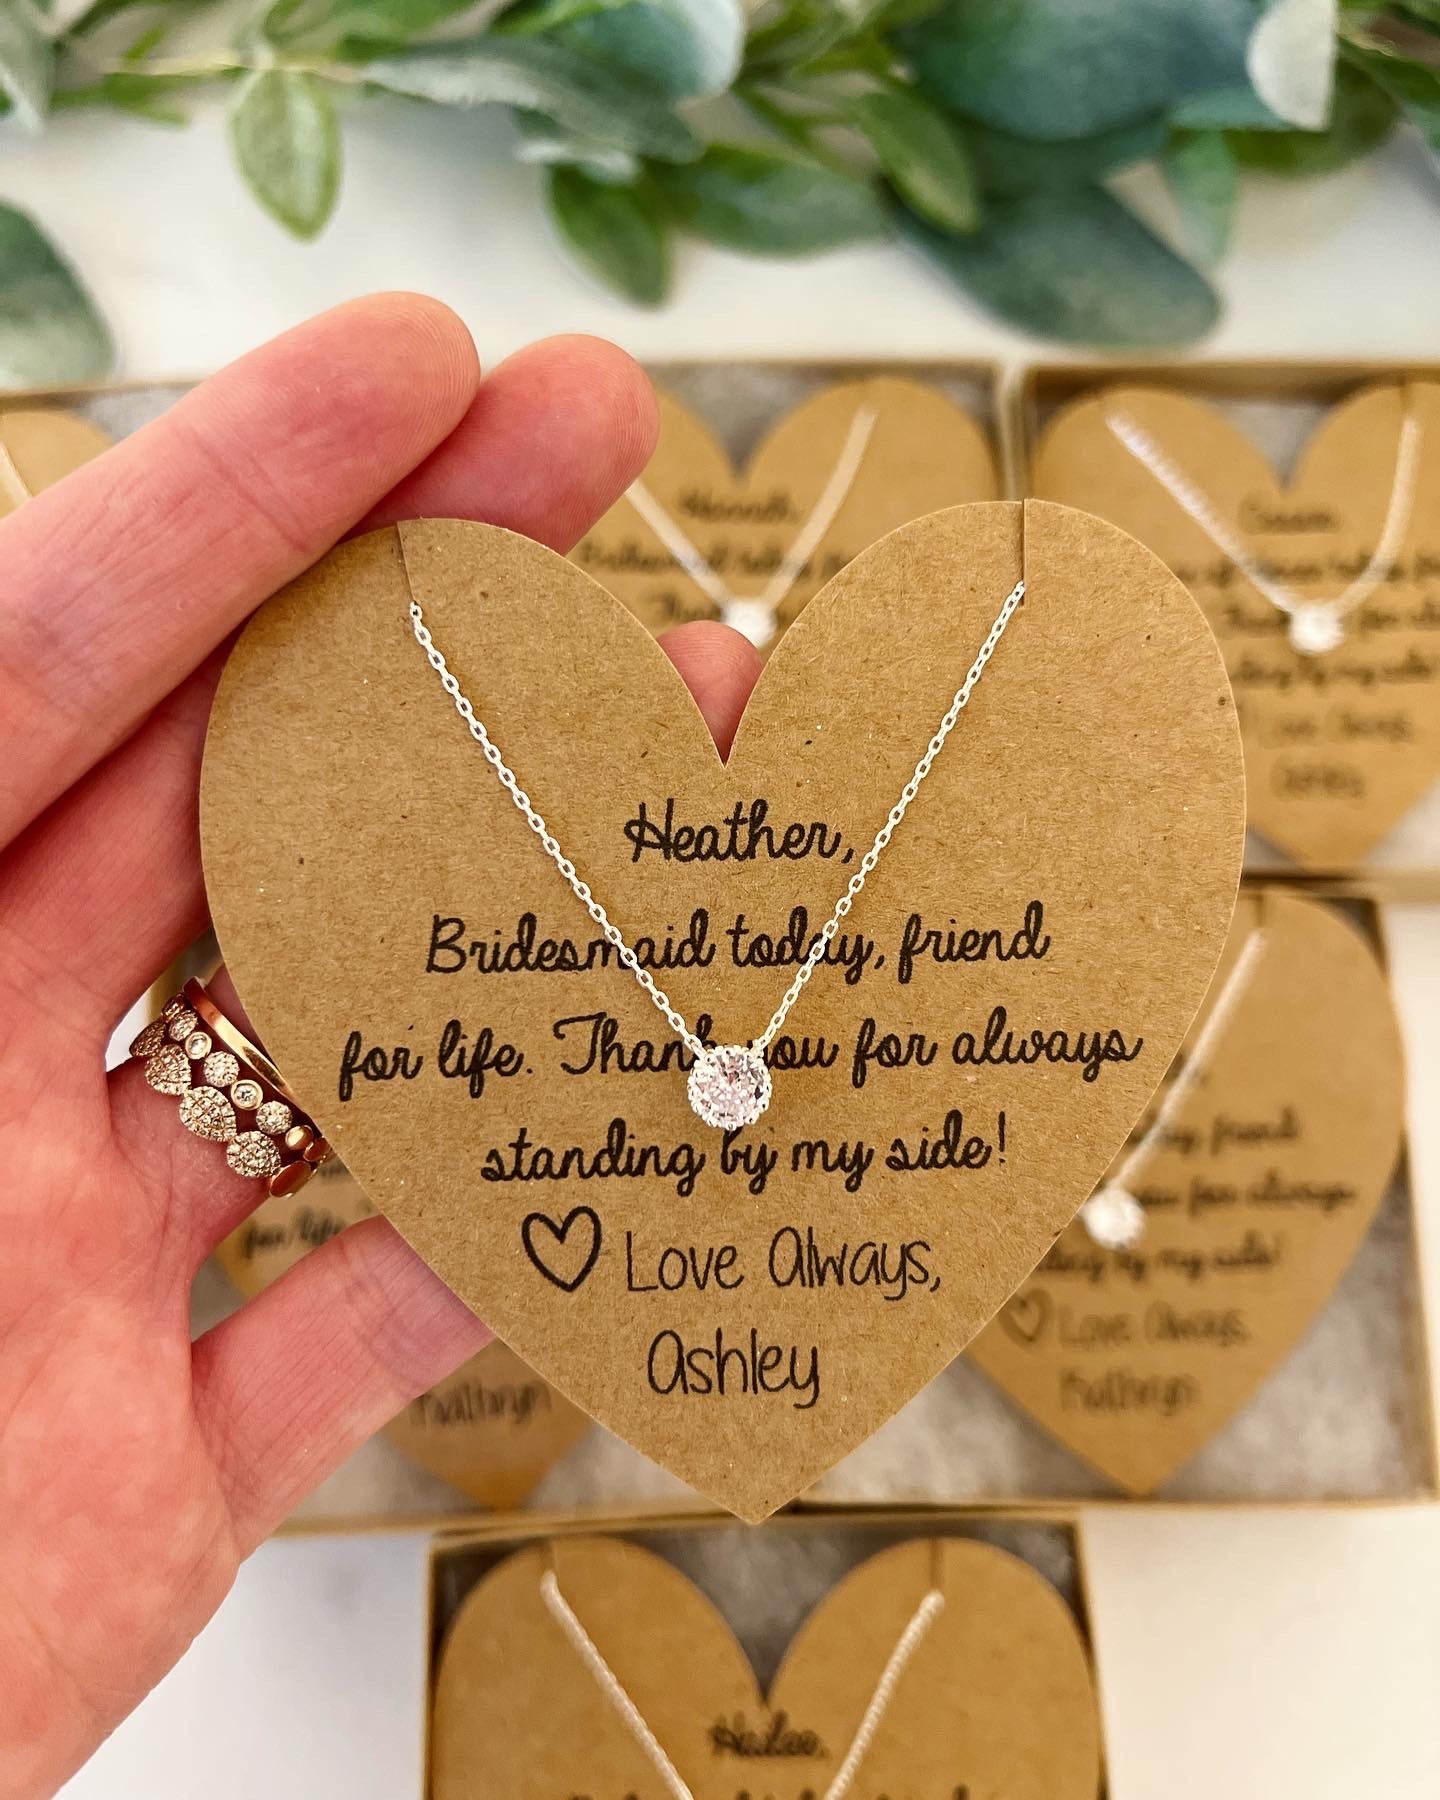 Bridesmaid Today, Friend for Life Bridesmaid Necklace